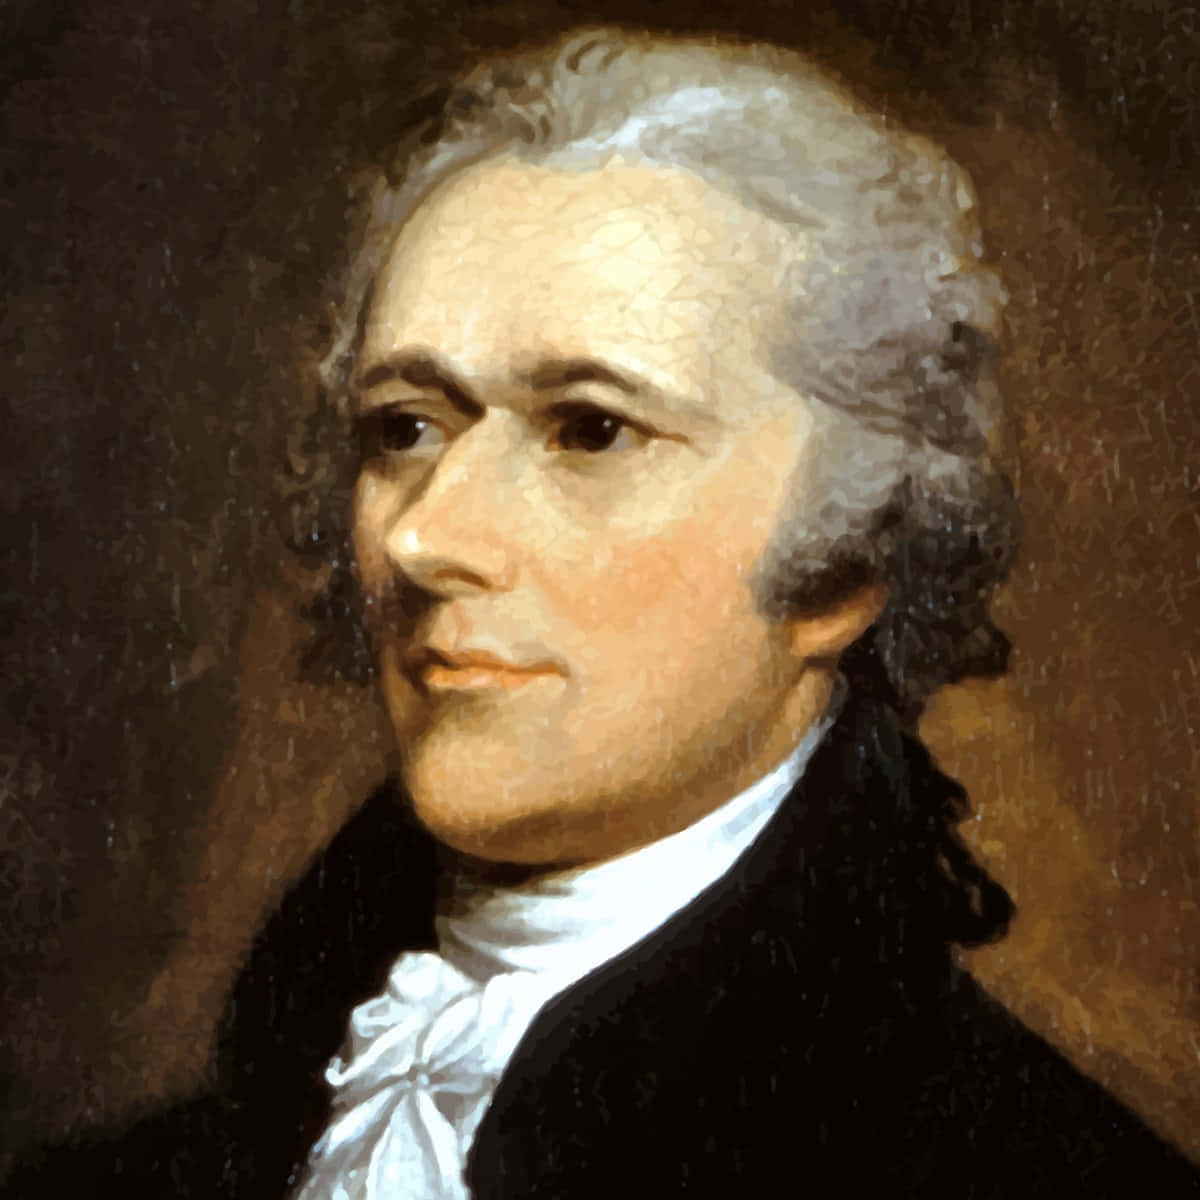 Alexander Hamilton, Founding Father of the United States